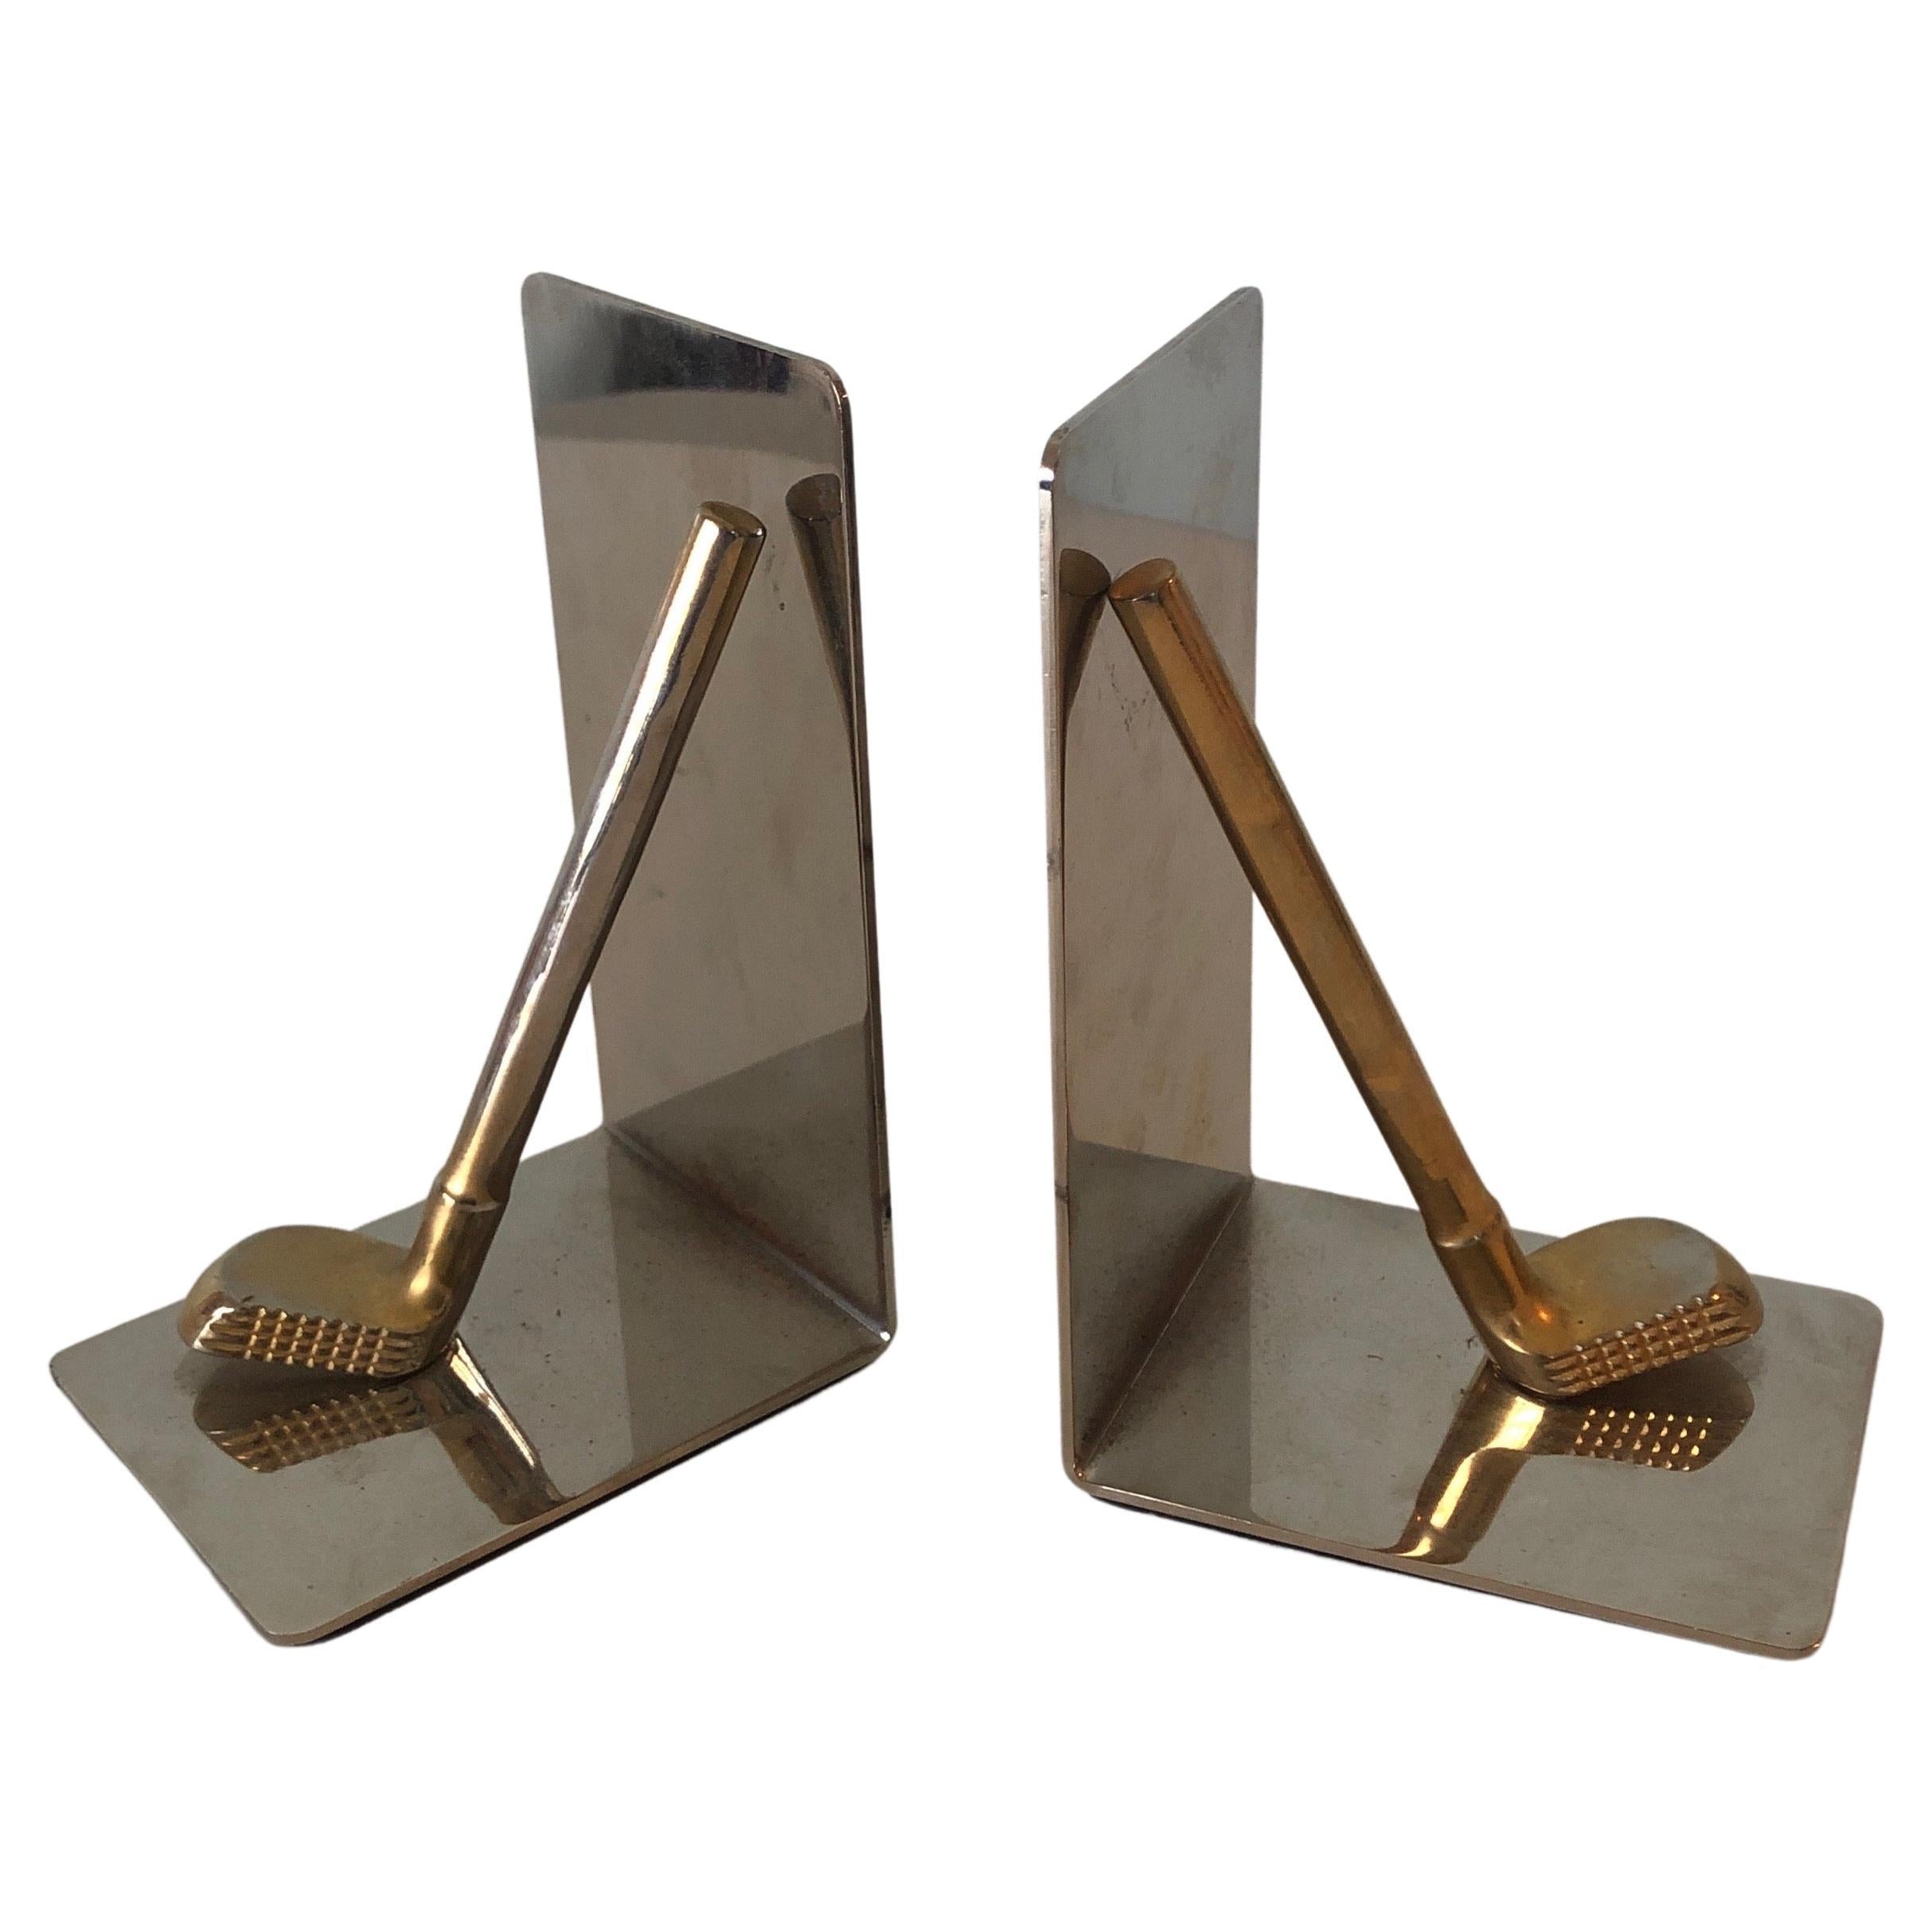 Pair of Vintage Brass and Polished Chrome "Golfer" Bookends